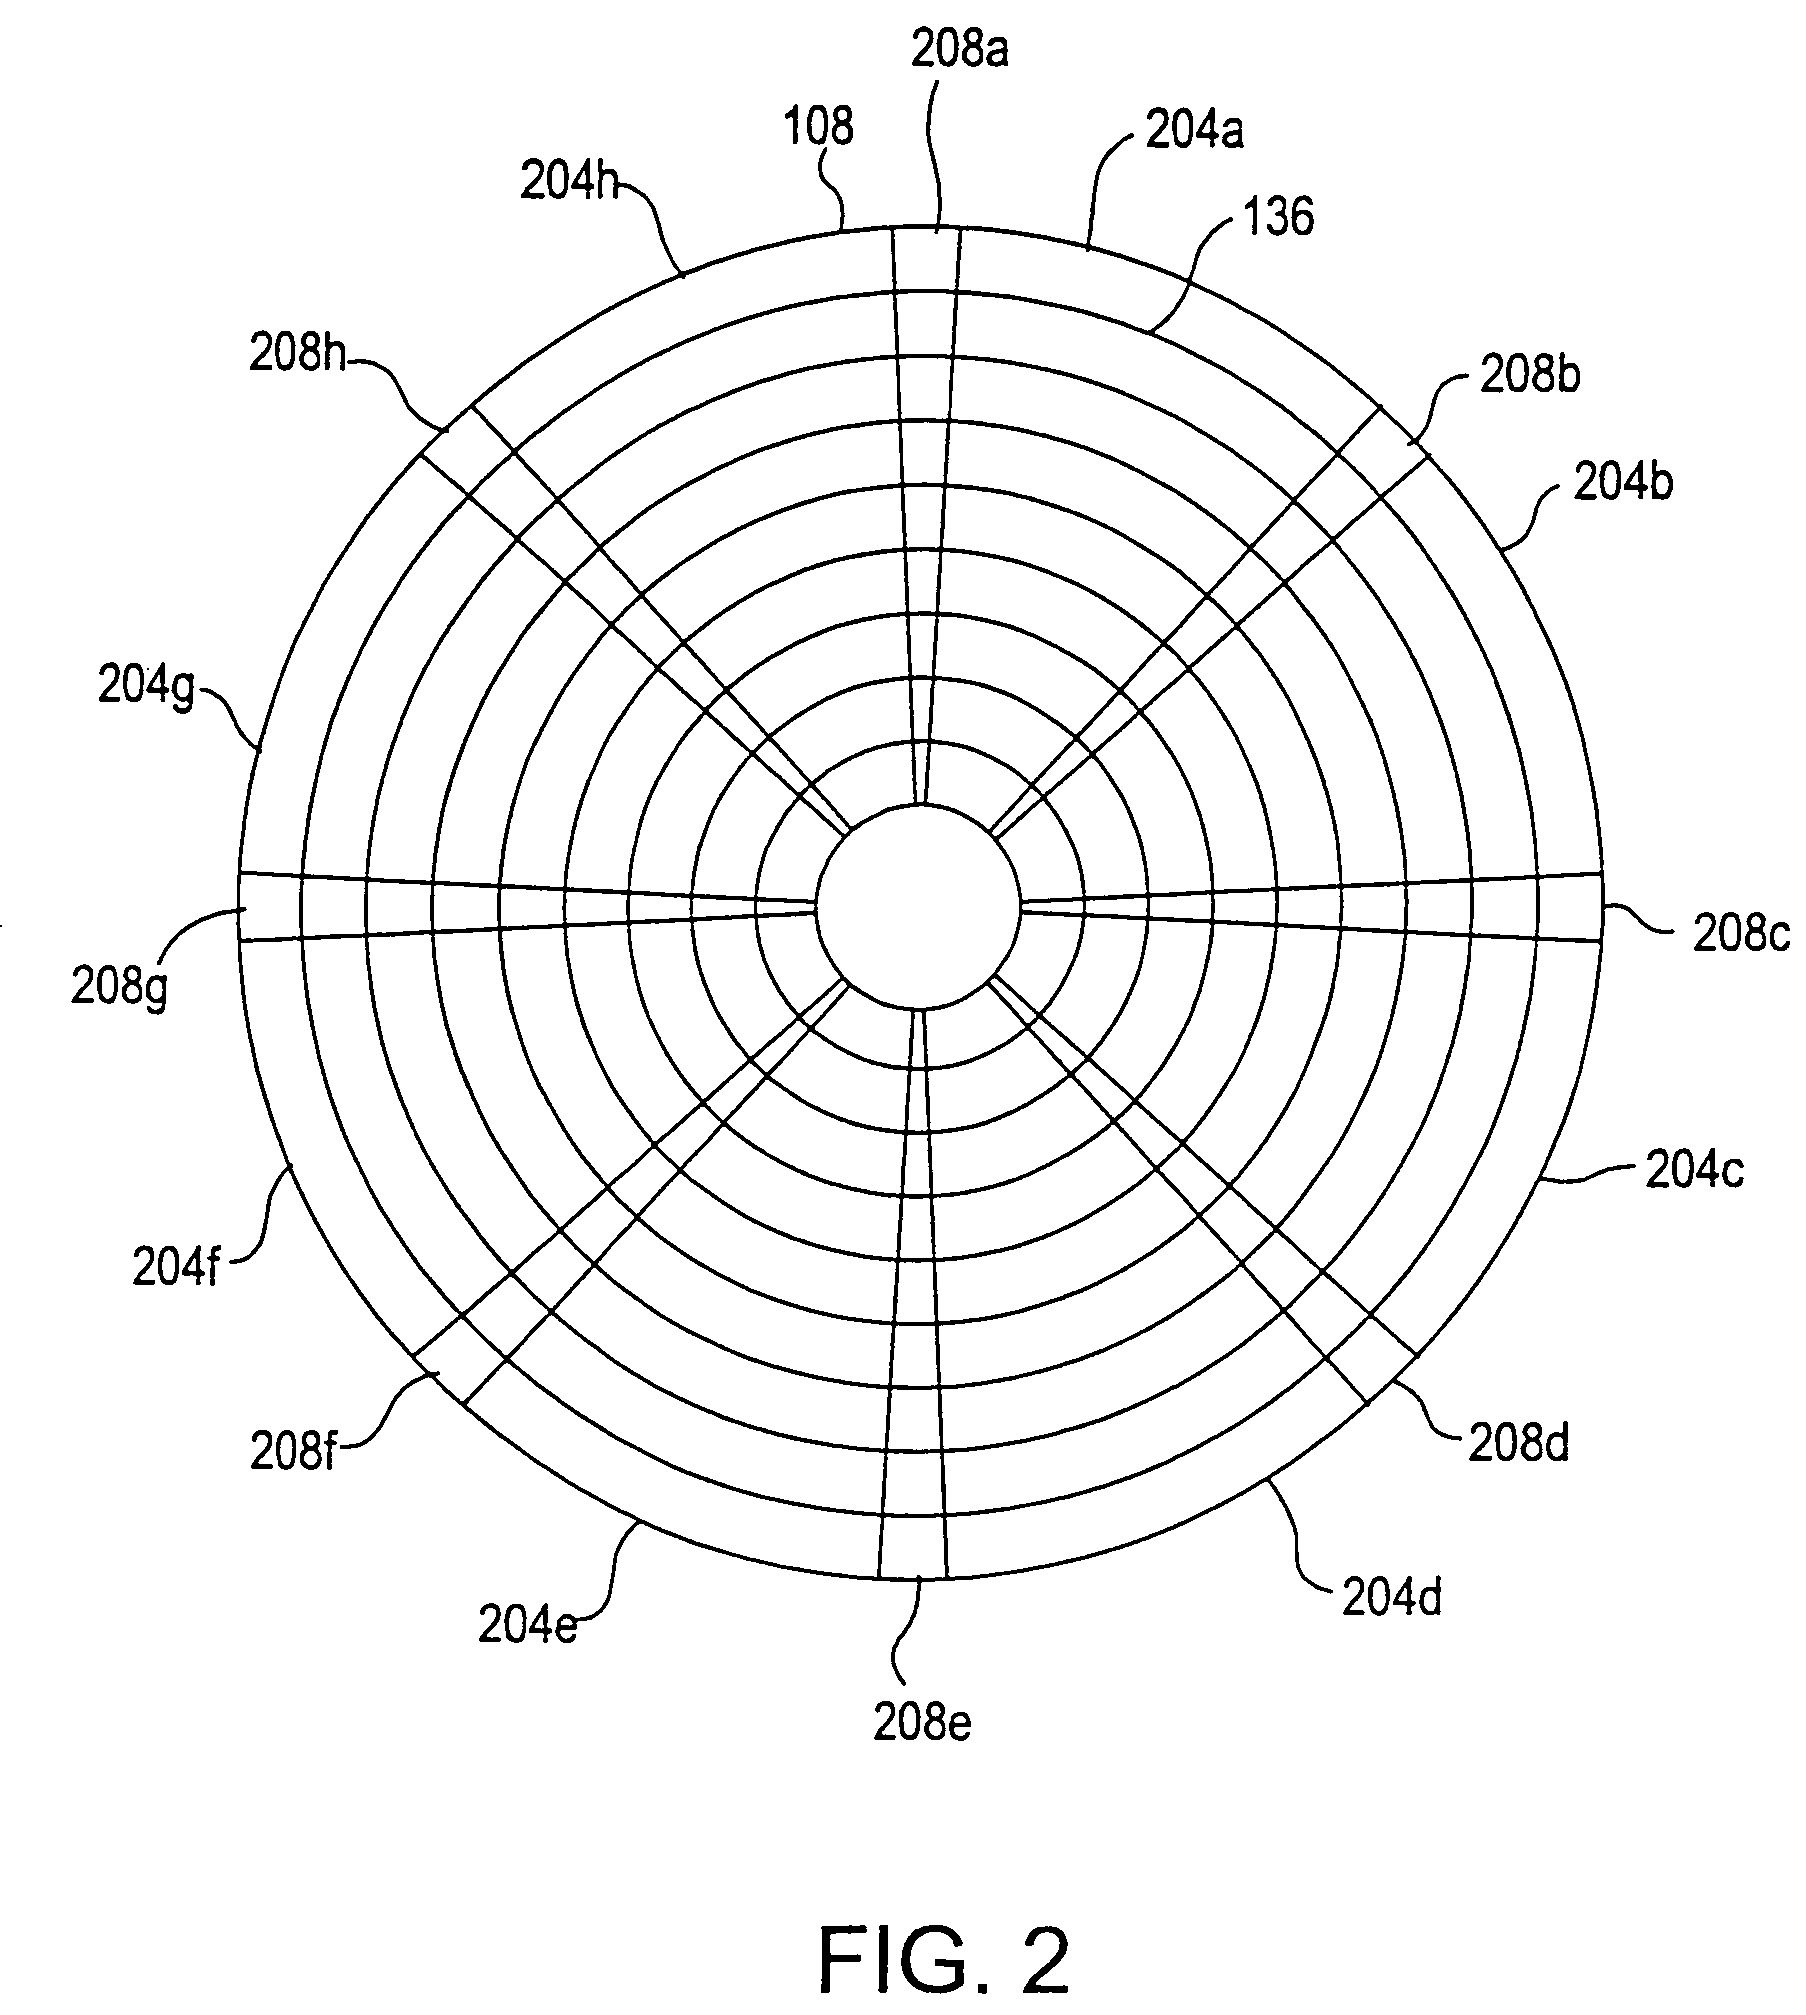 Dynamic shock detection in disk drive using accumulated average position error